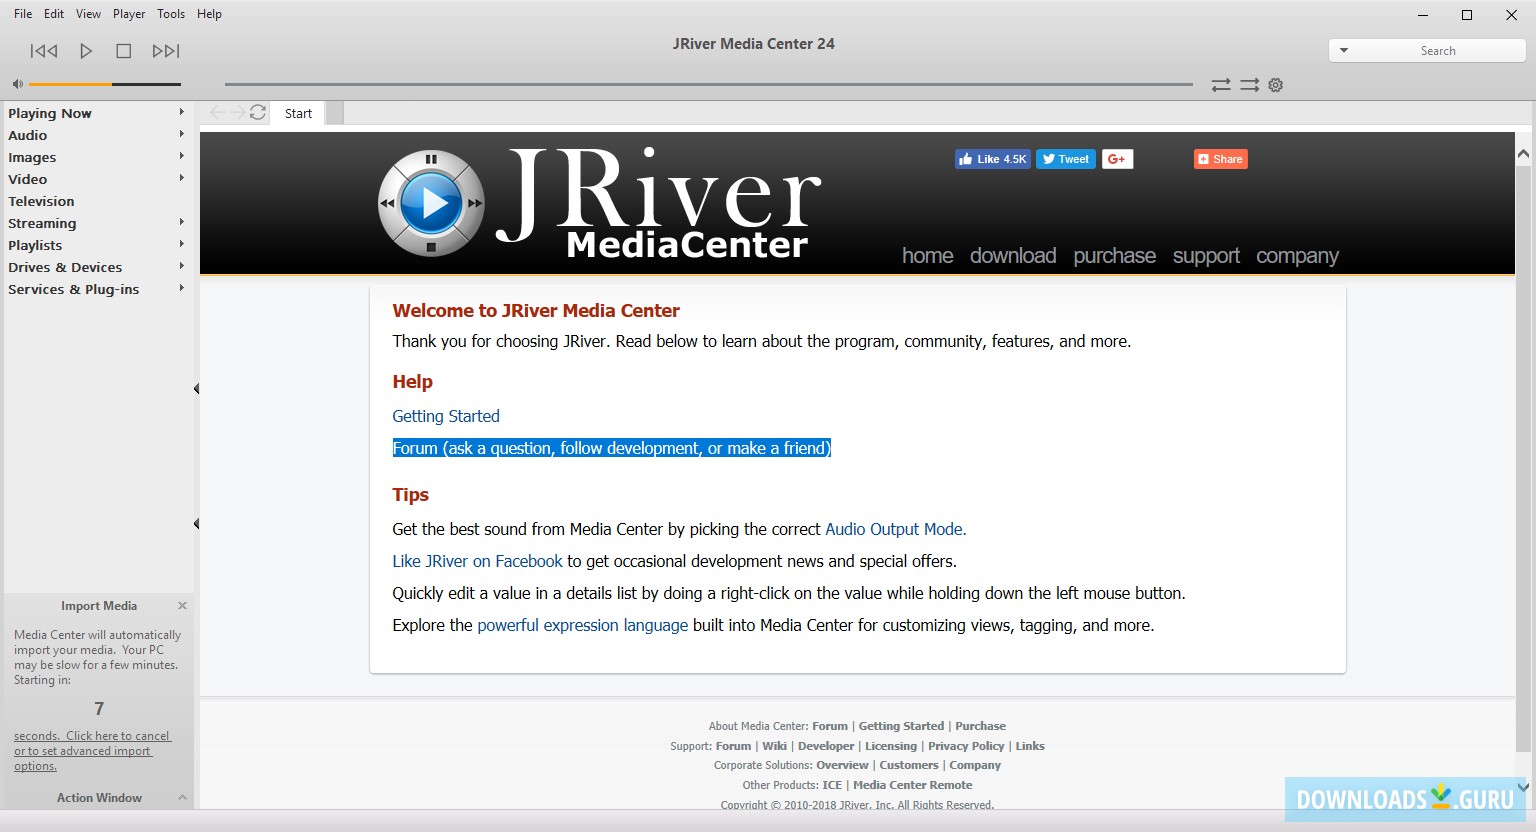 download the last version for android JRiver Media Center 31.0.23